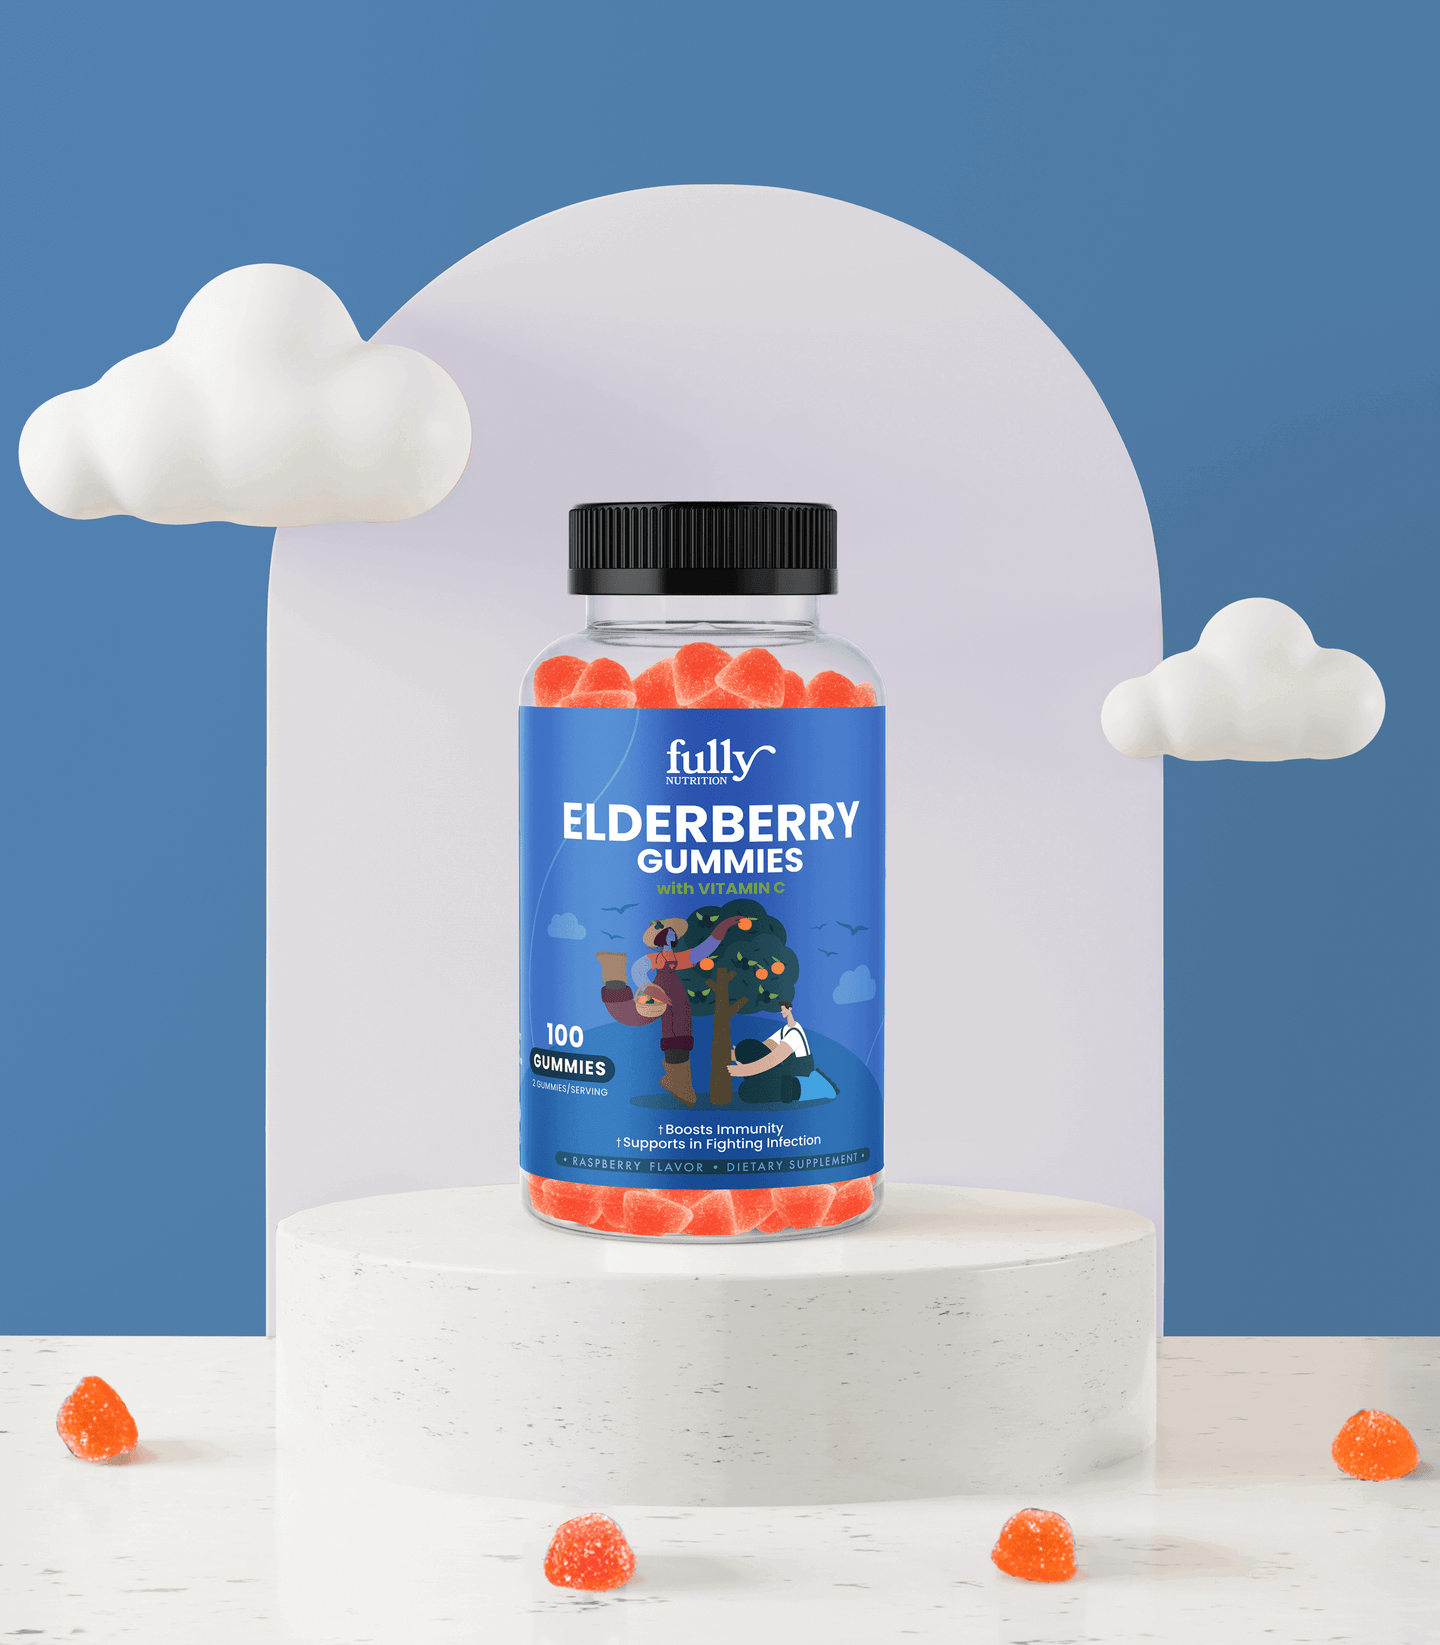 Fully Nutrition Elderberry gummies displayed against a beautiful sky background, providing year-round immunity support for your entire family